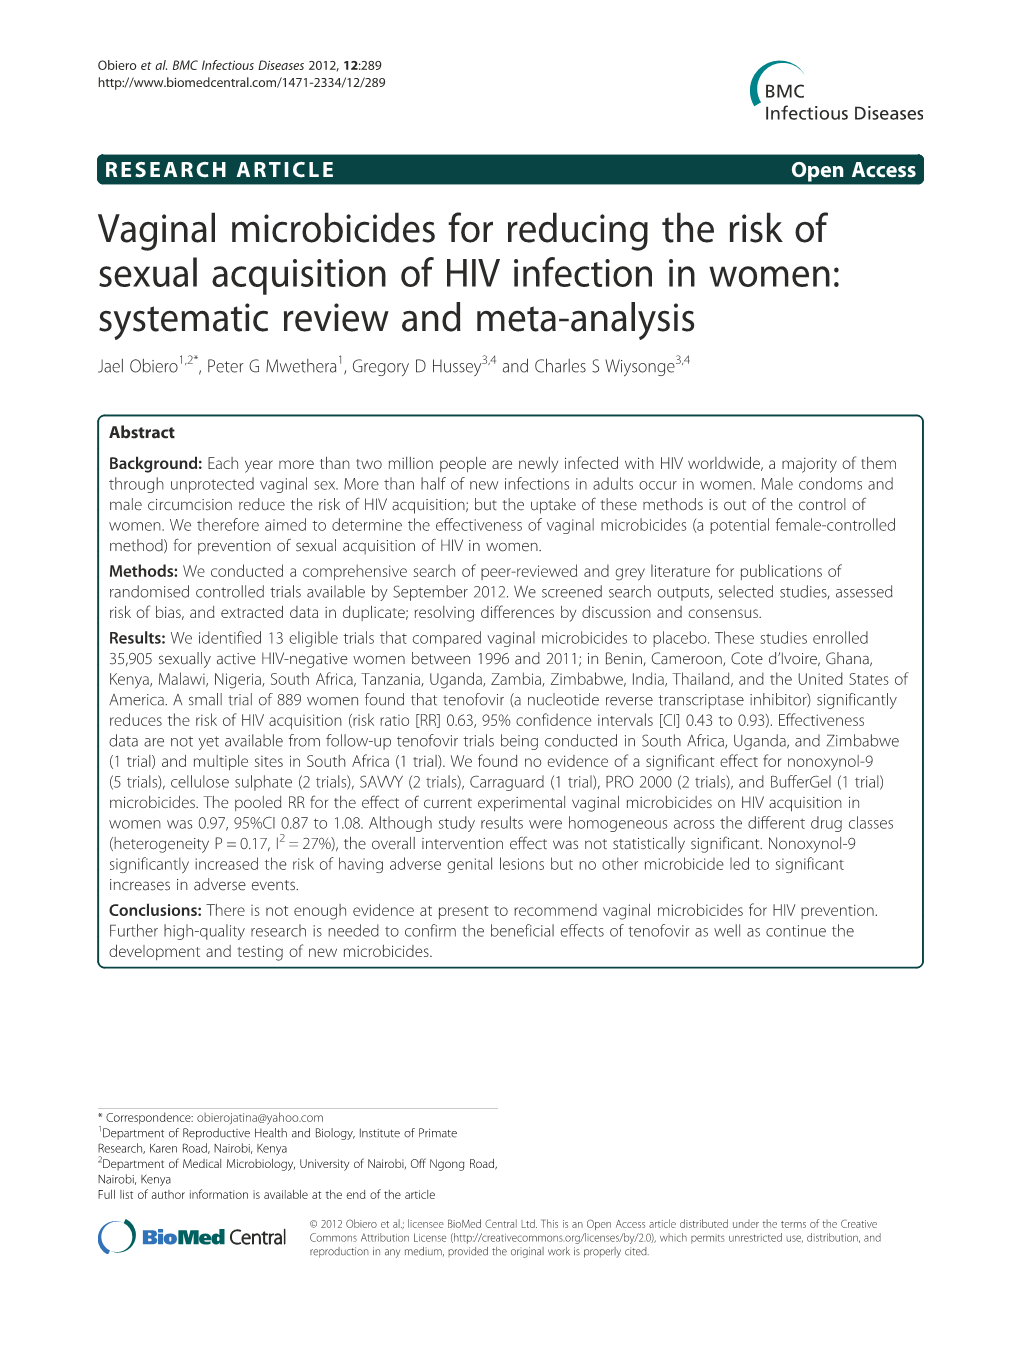 Vaginal Microbicides for Reducing the Risk of Sexual Acquisition of HIV